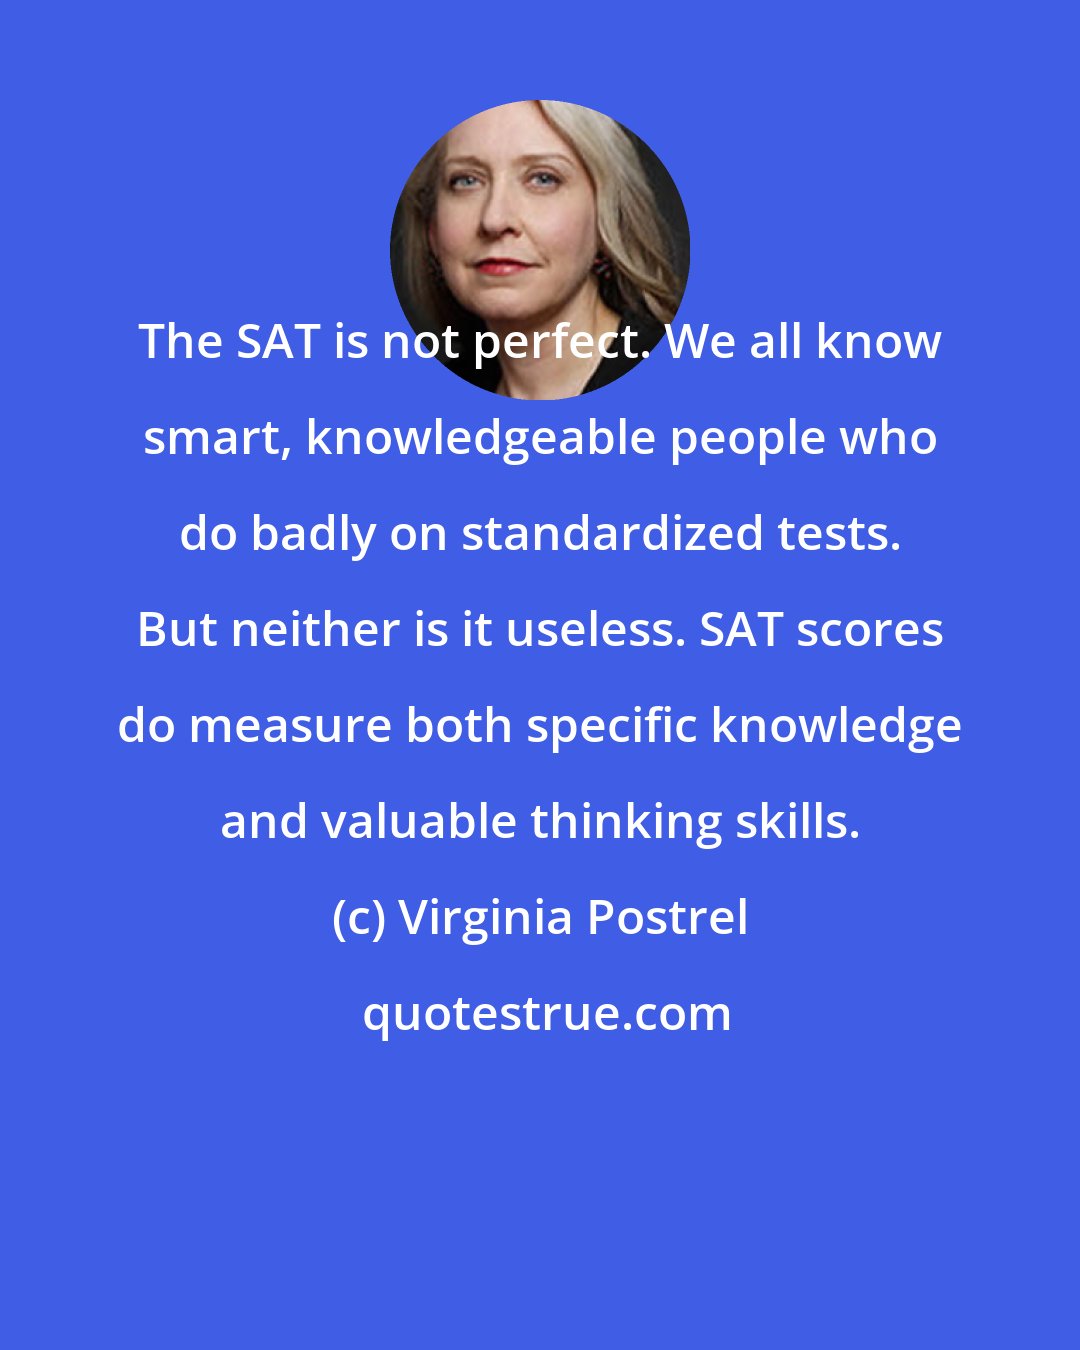 Virginia Postrel: The SAT is not perfect. We all know smart, knowledgeable people who do badly on standardized tests. But neither is it useless. SAT scores do measure both specific knowledge and valuable thinking skills.